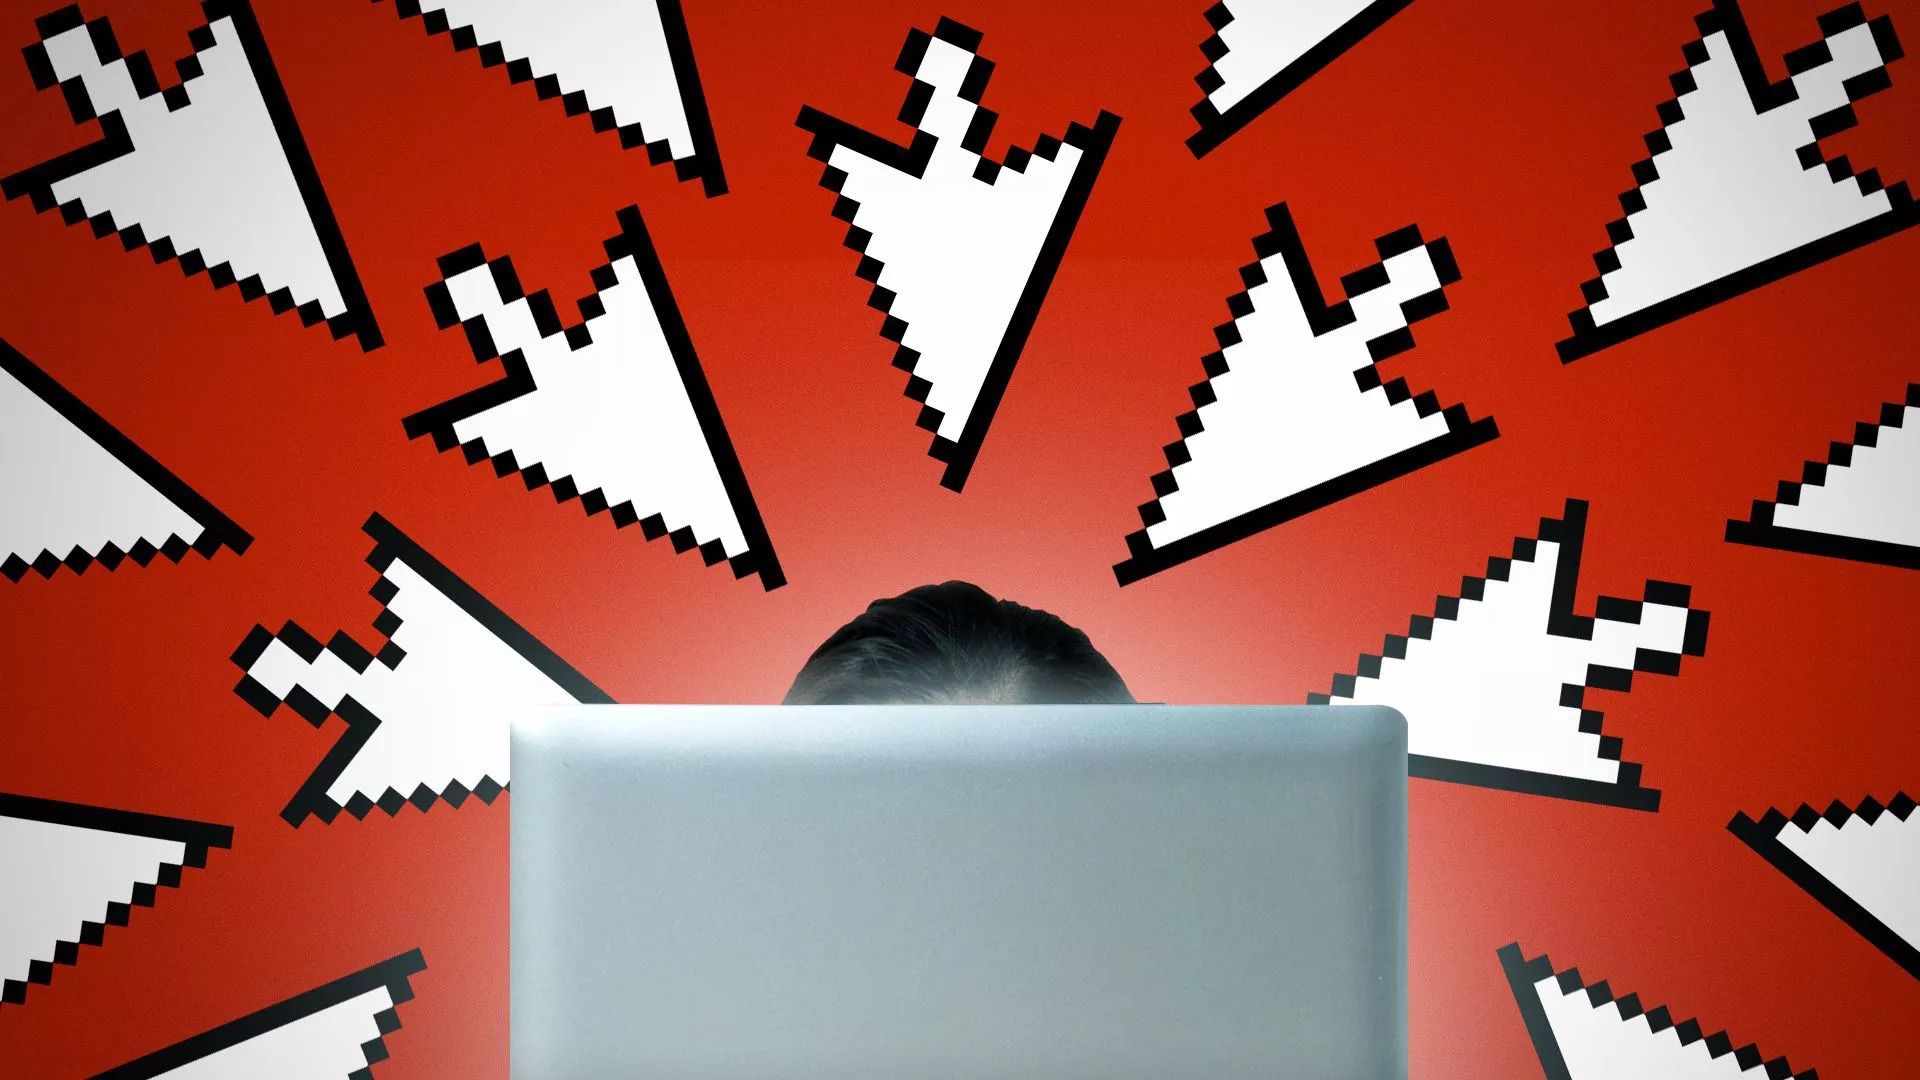 A graphic of a person using a computer surrounded by computer arrows